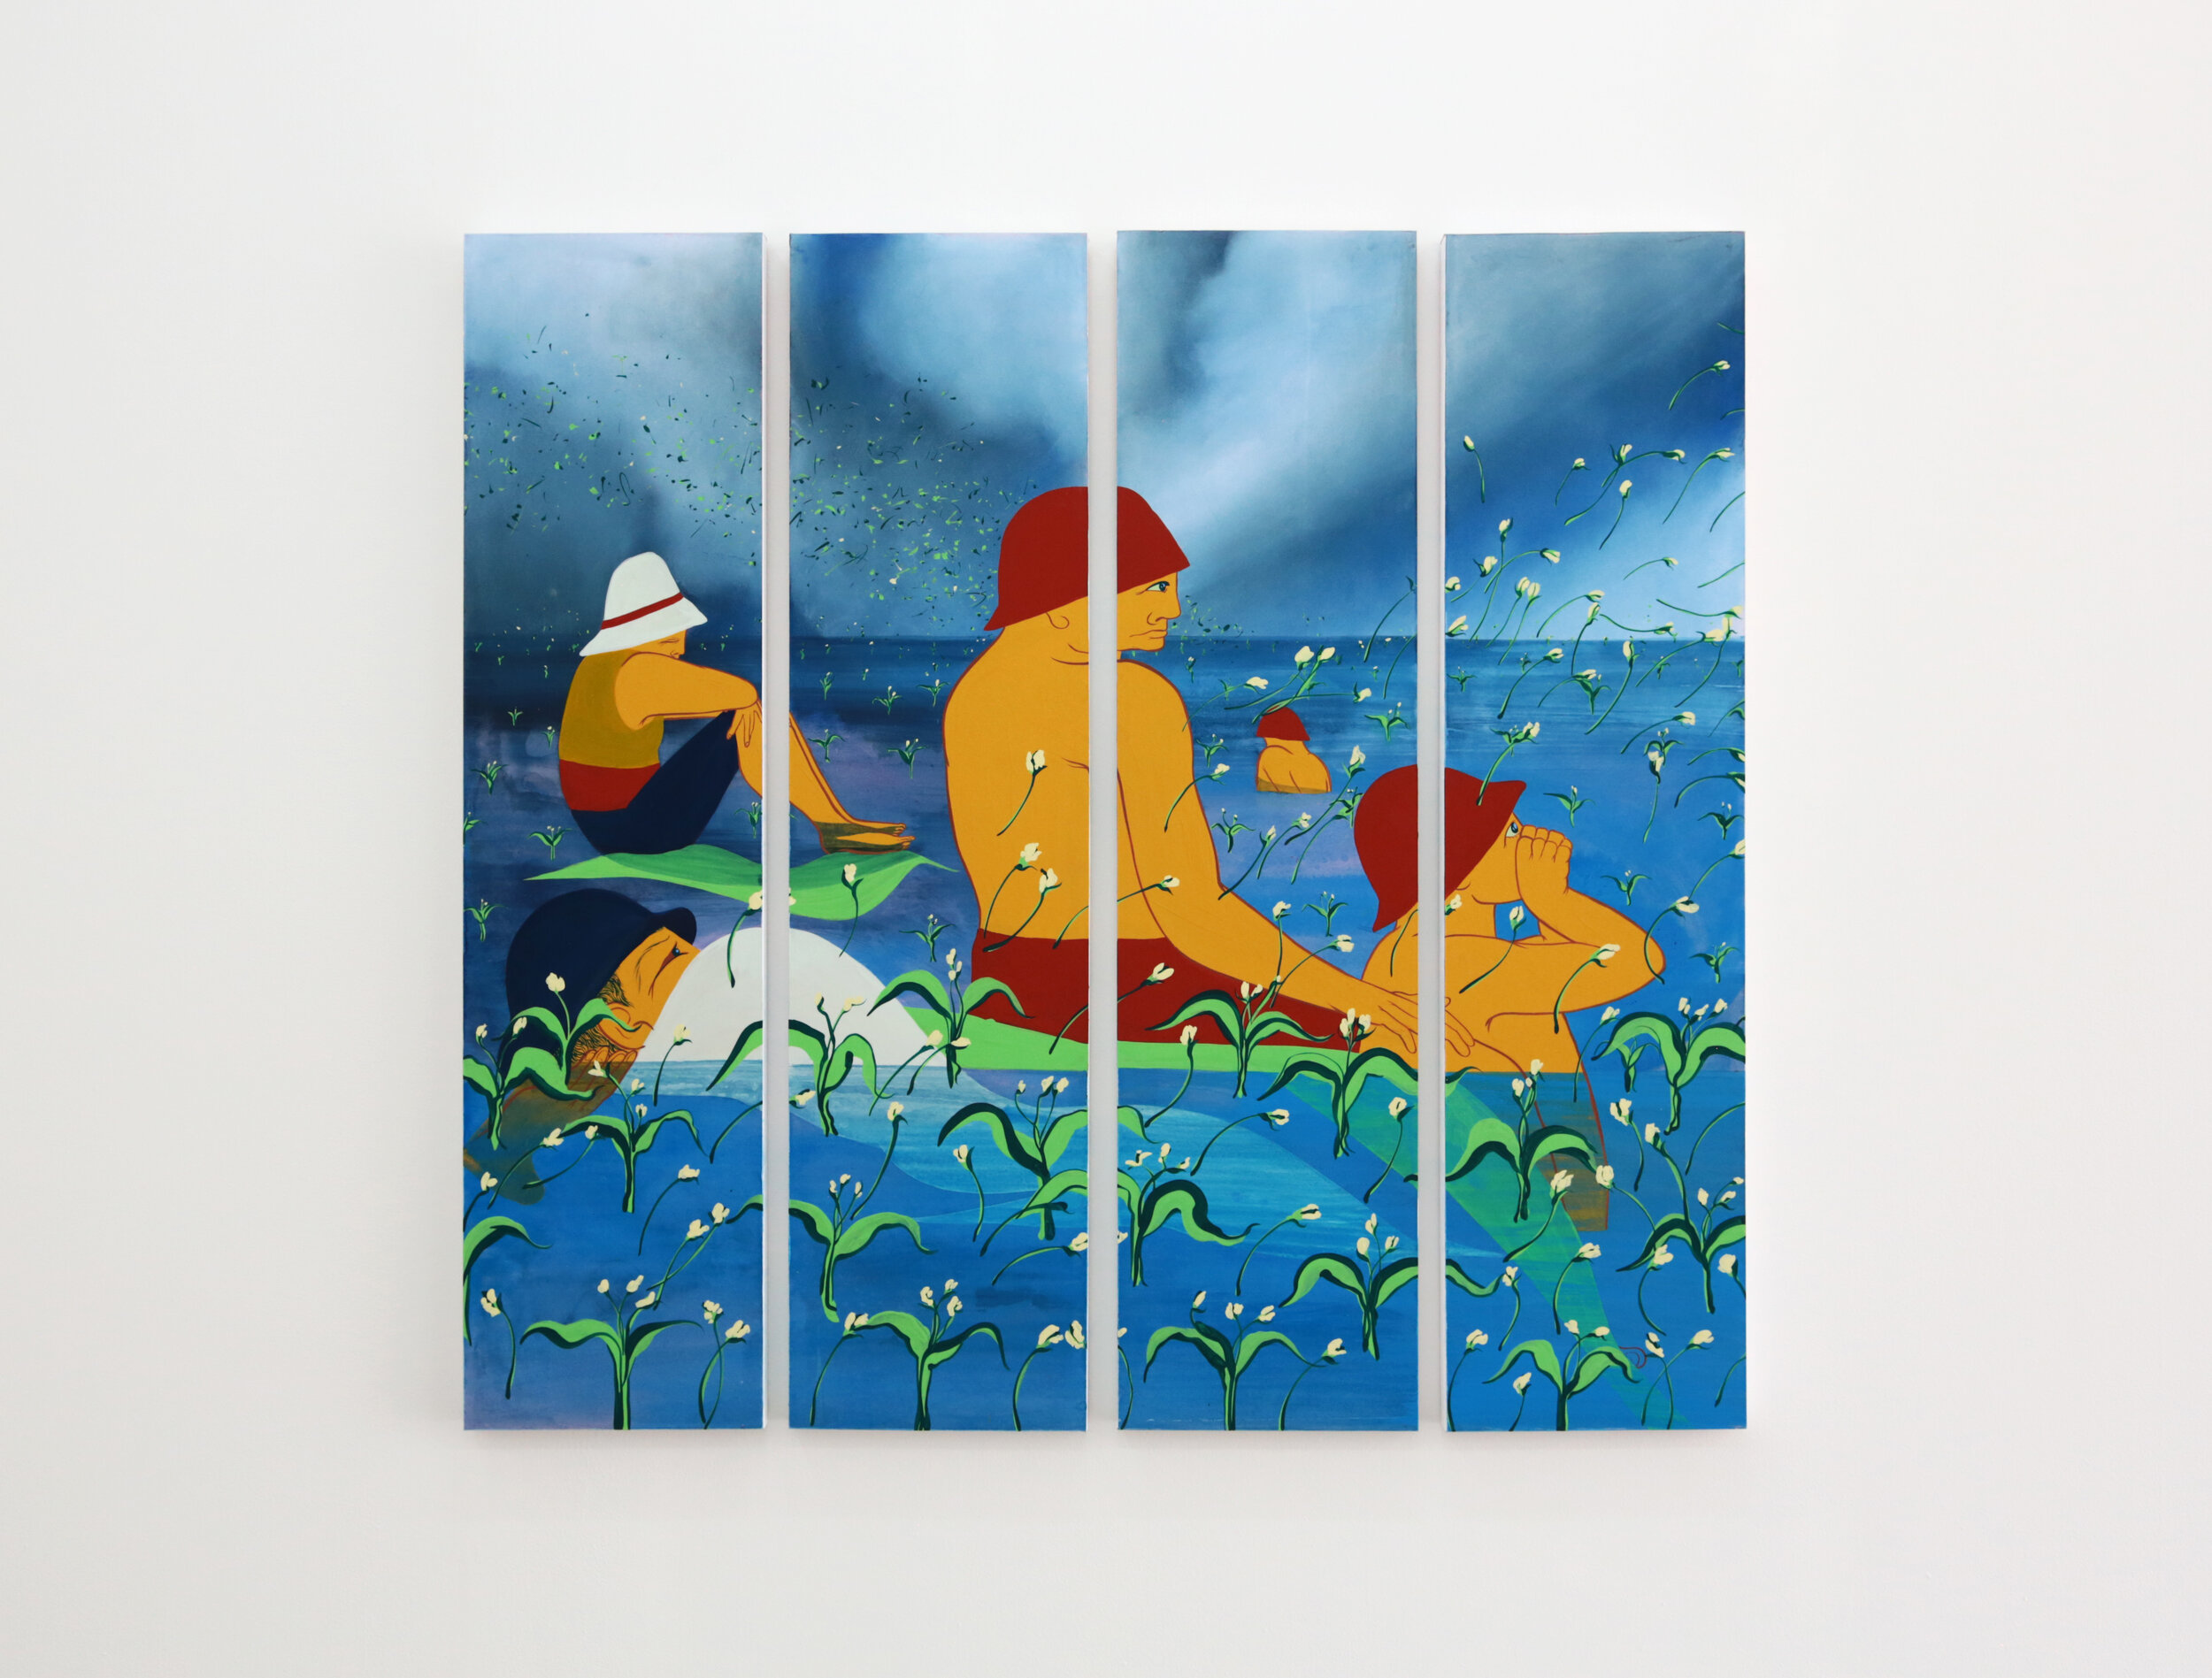   Tammy Nguyen   Flood Season  2020 Watercolor, vinyl paint, and pastel on paper, stretched over wooden panel48 x 51 inches (including 1 inch spaces between each panel) 